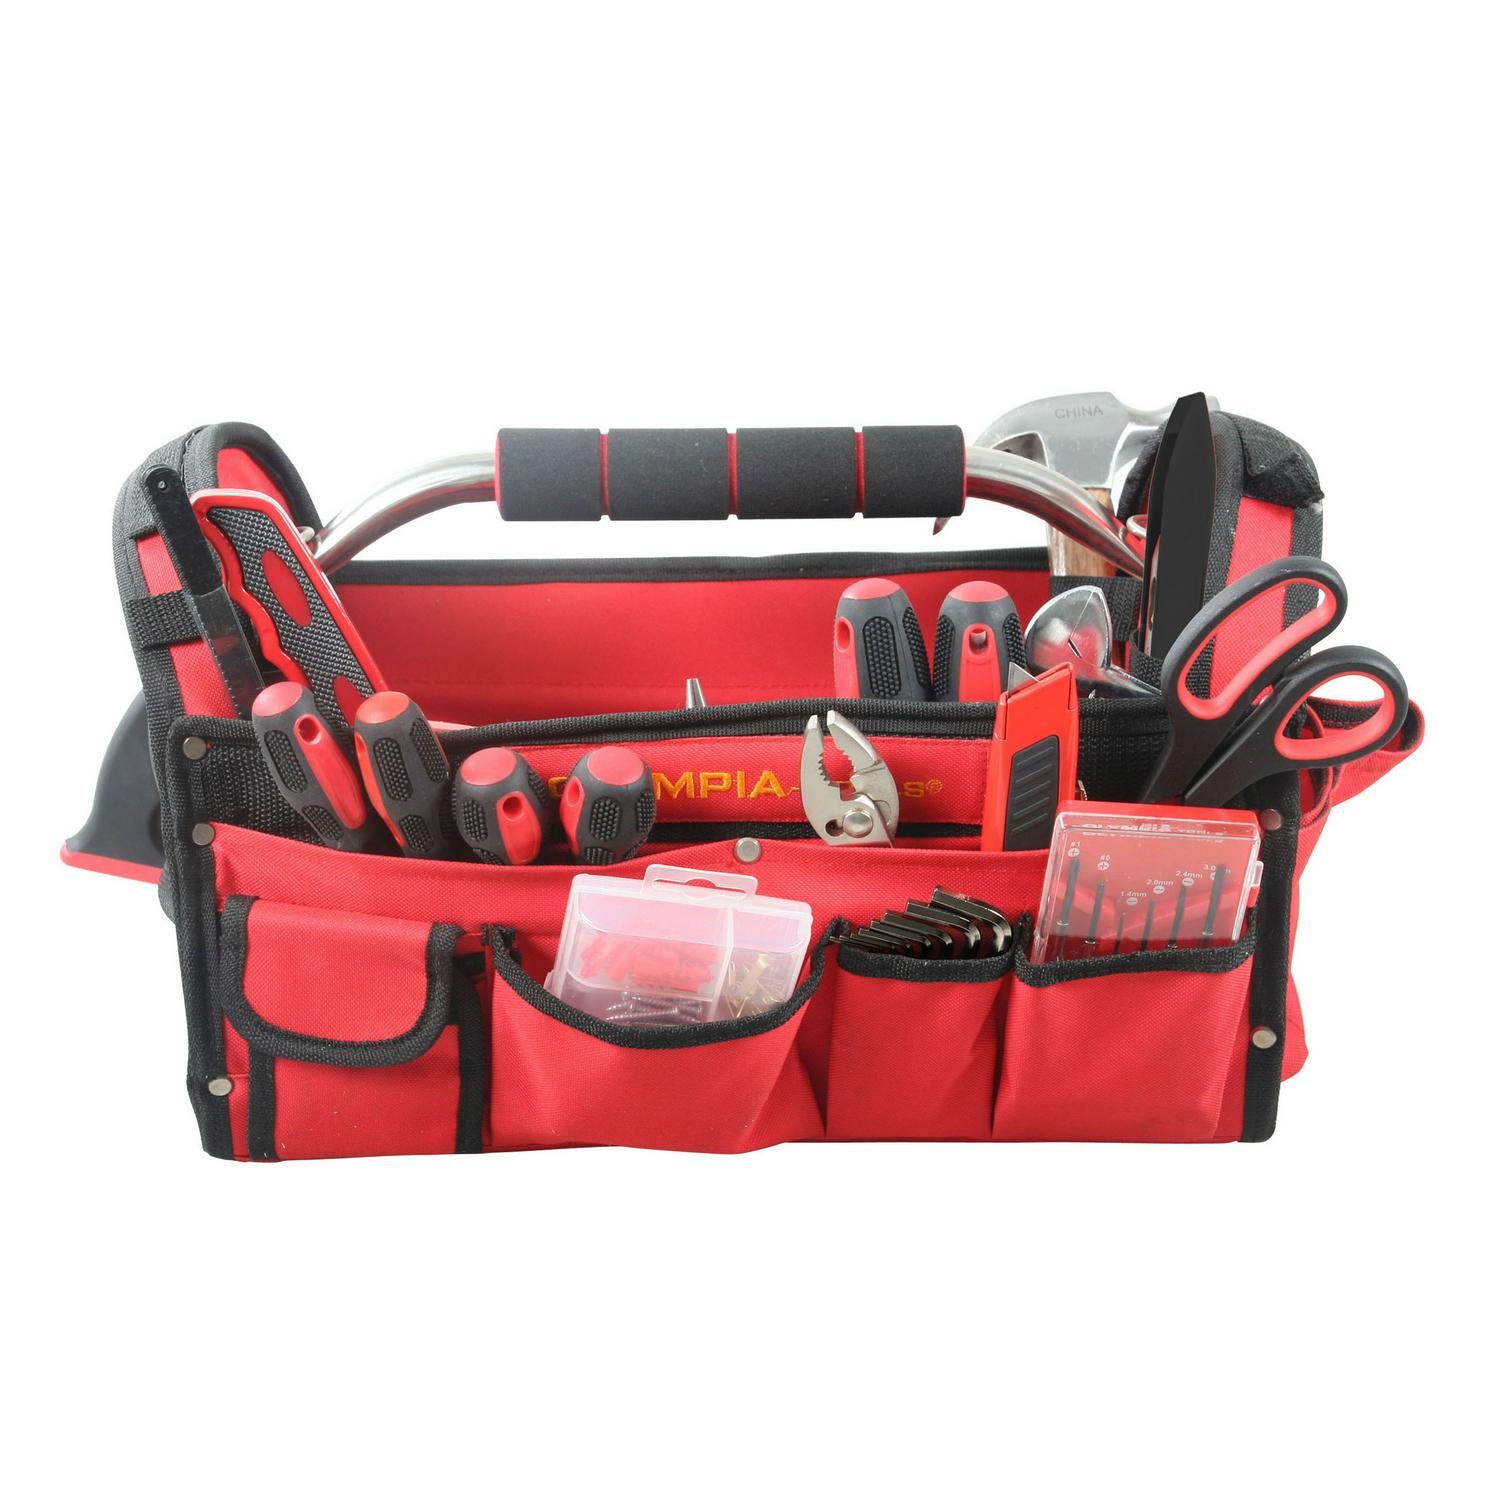 Olympia Tools 90-447 Red and Black Tool Bag 52 Piece Set